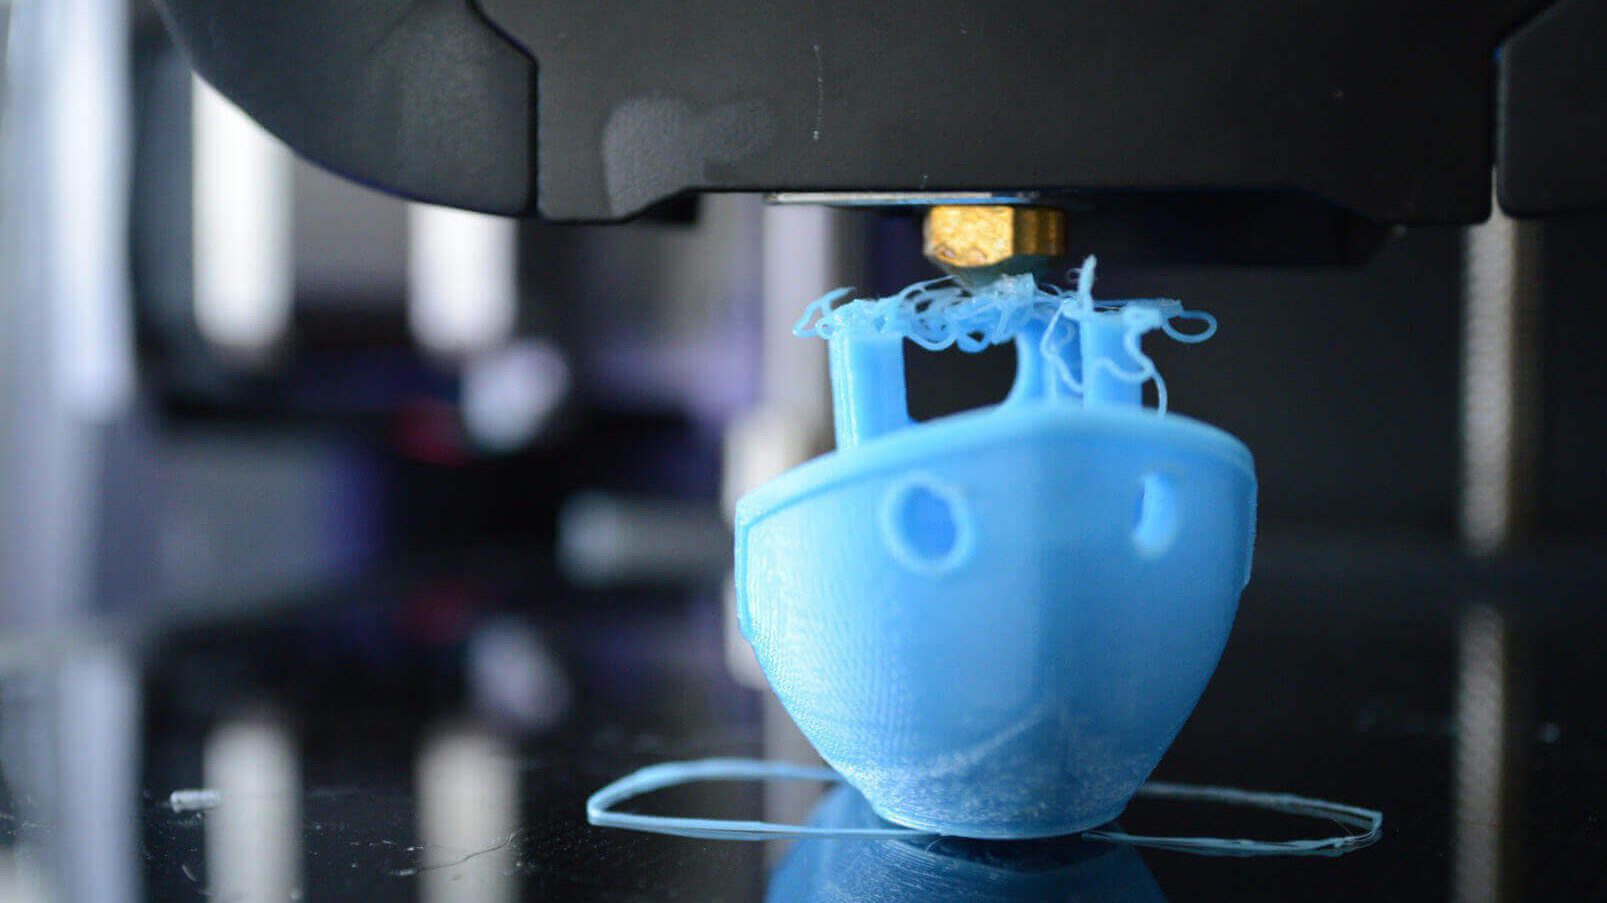 Troubleshooting: Does your 3D printer stop in the middle of a print? We  have the solution.